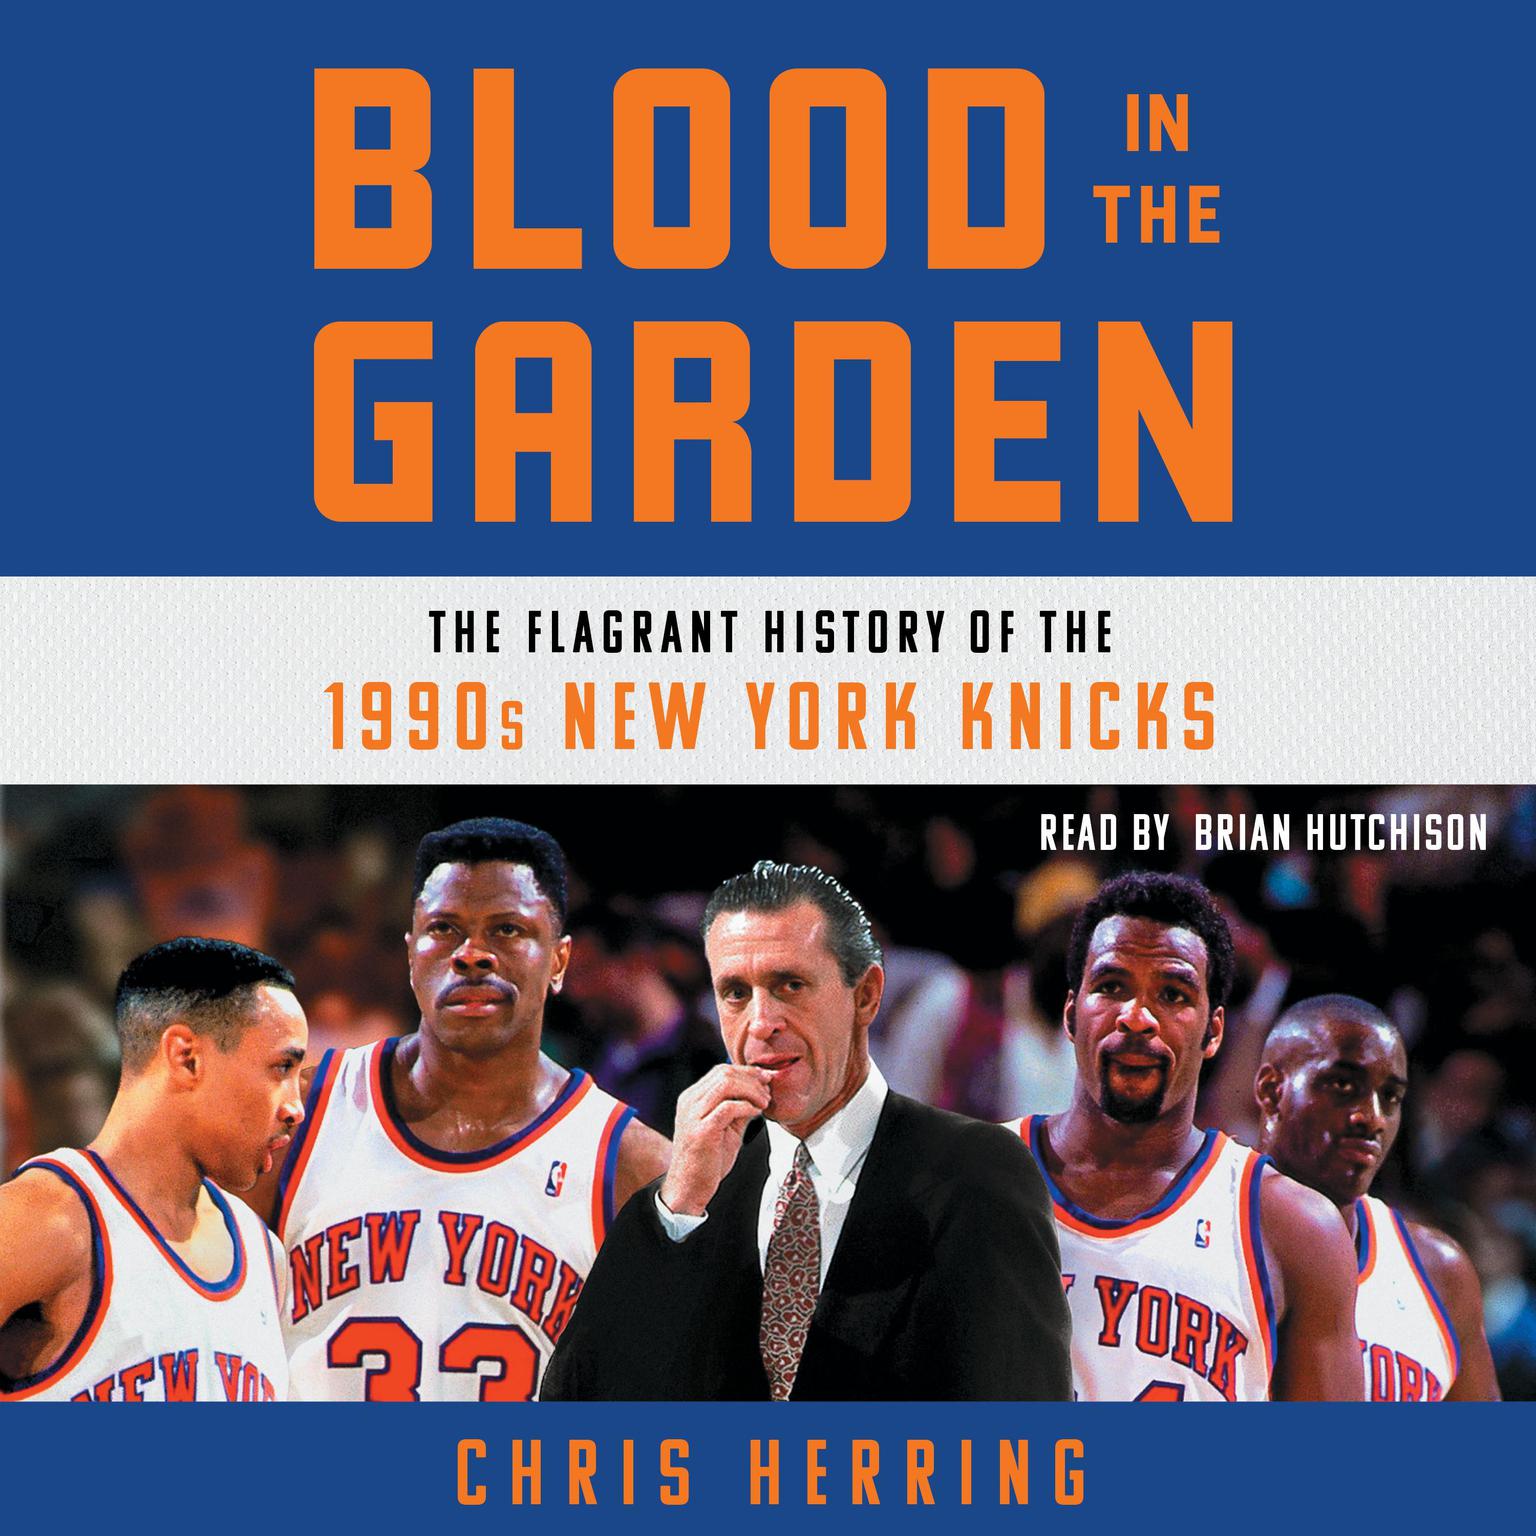 Blood in the Garden: The Flagrant History of the 1990s New York Knicks Audiobook, by Chris Herring